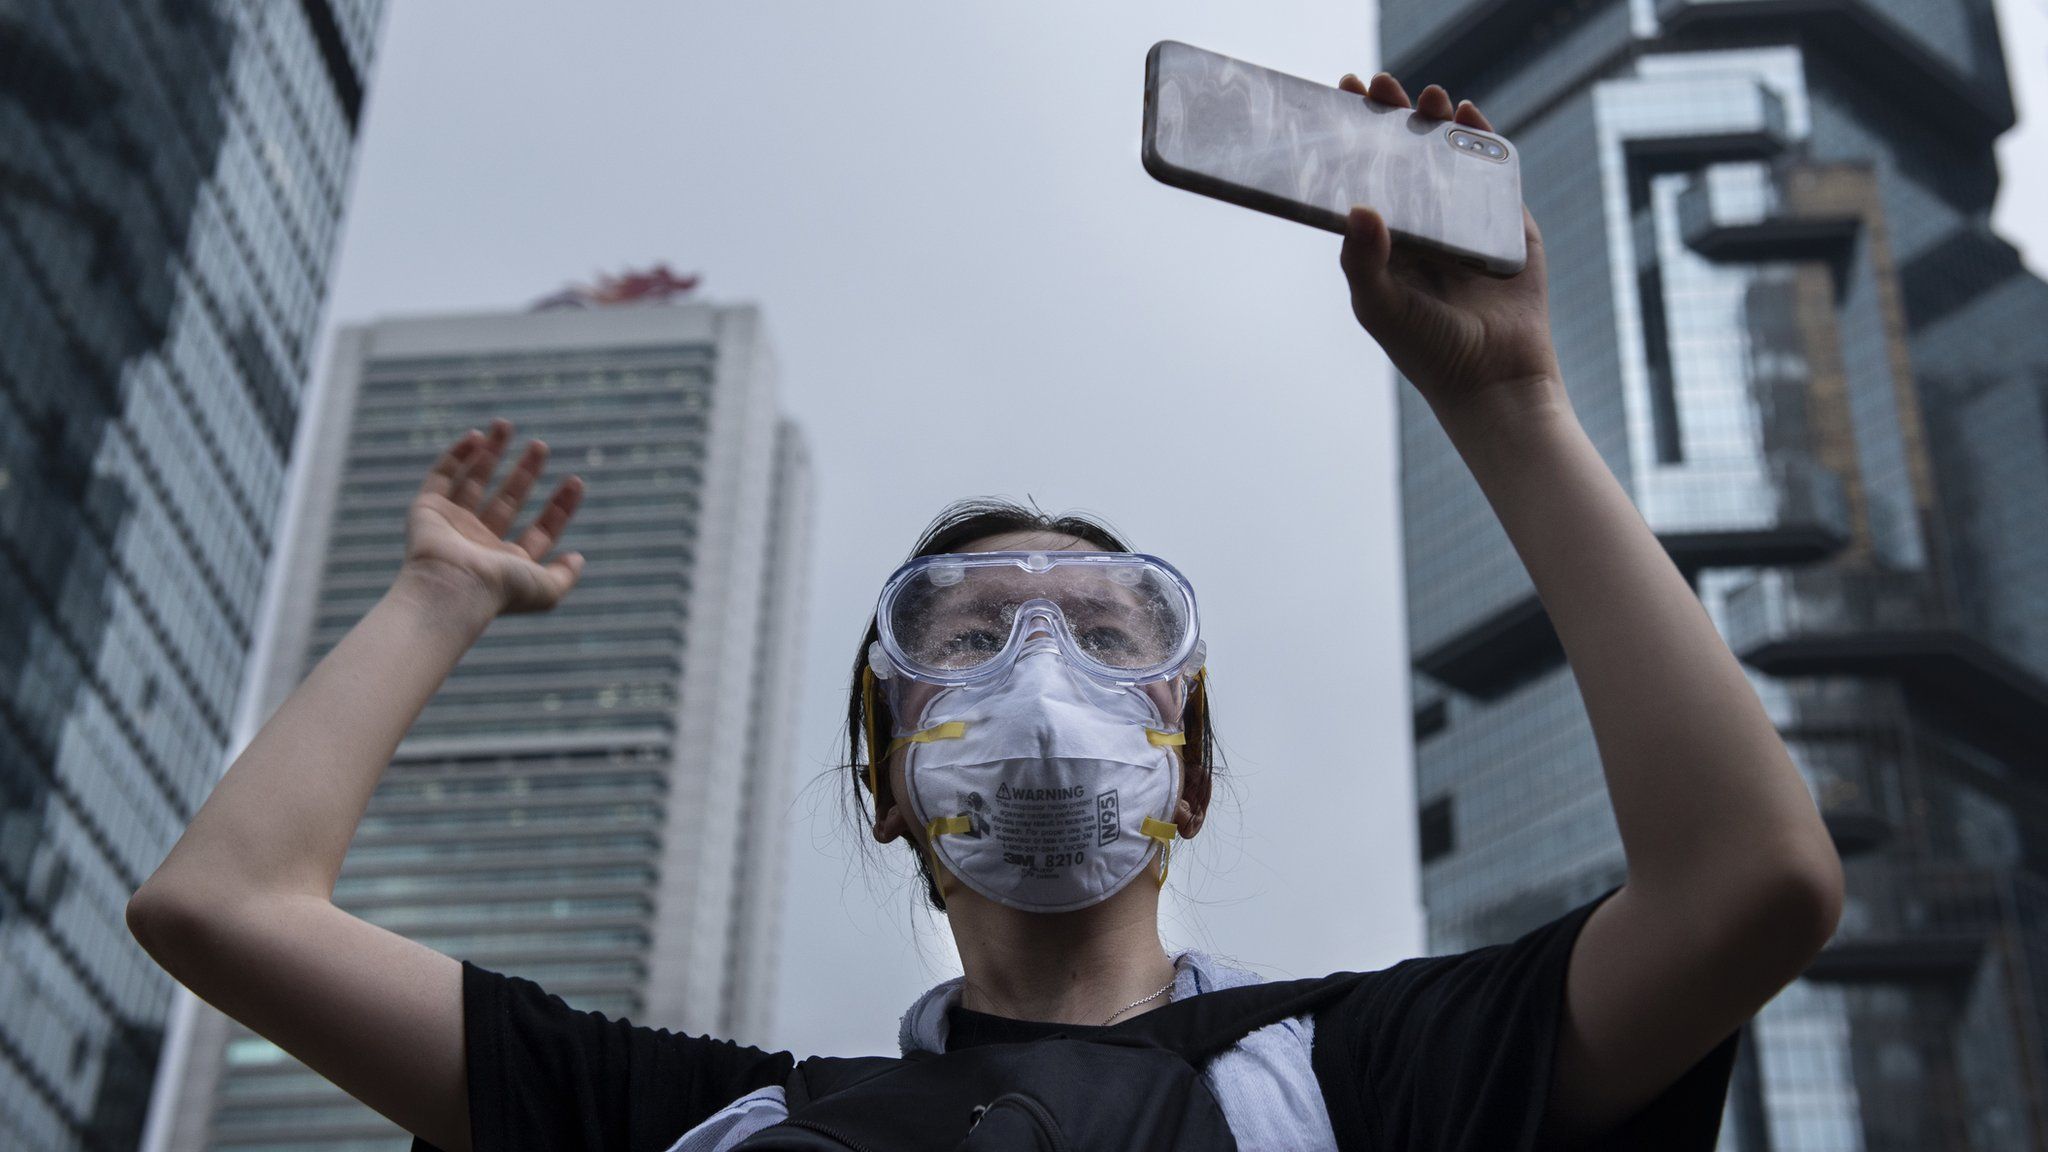 A protester holds a mobile phone